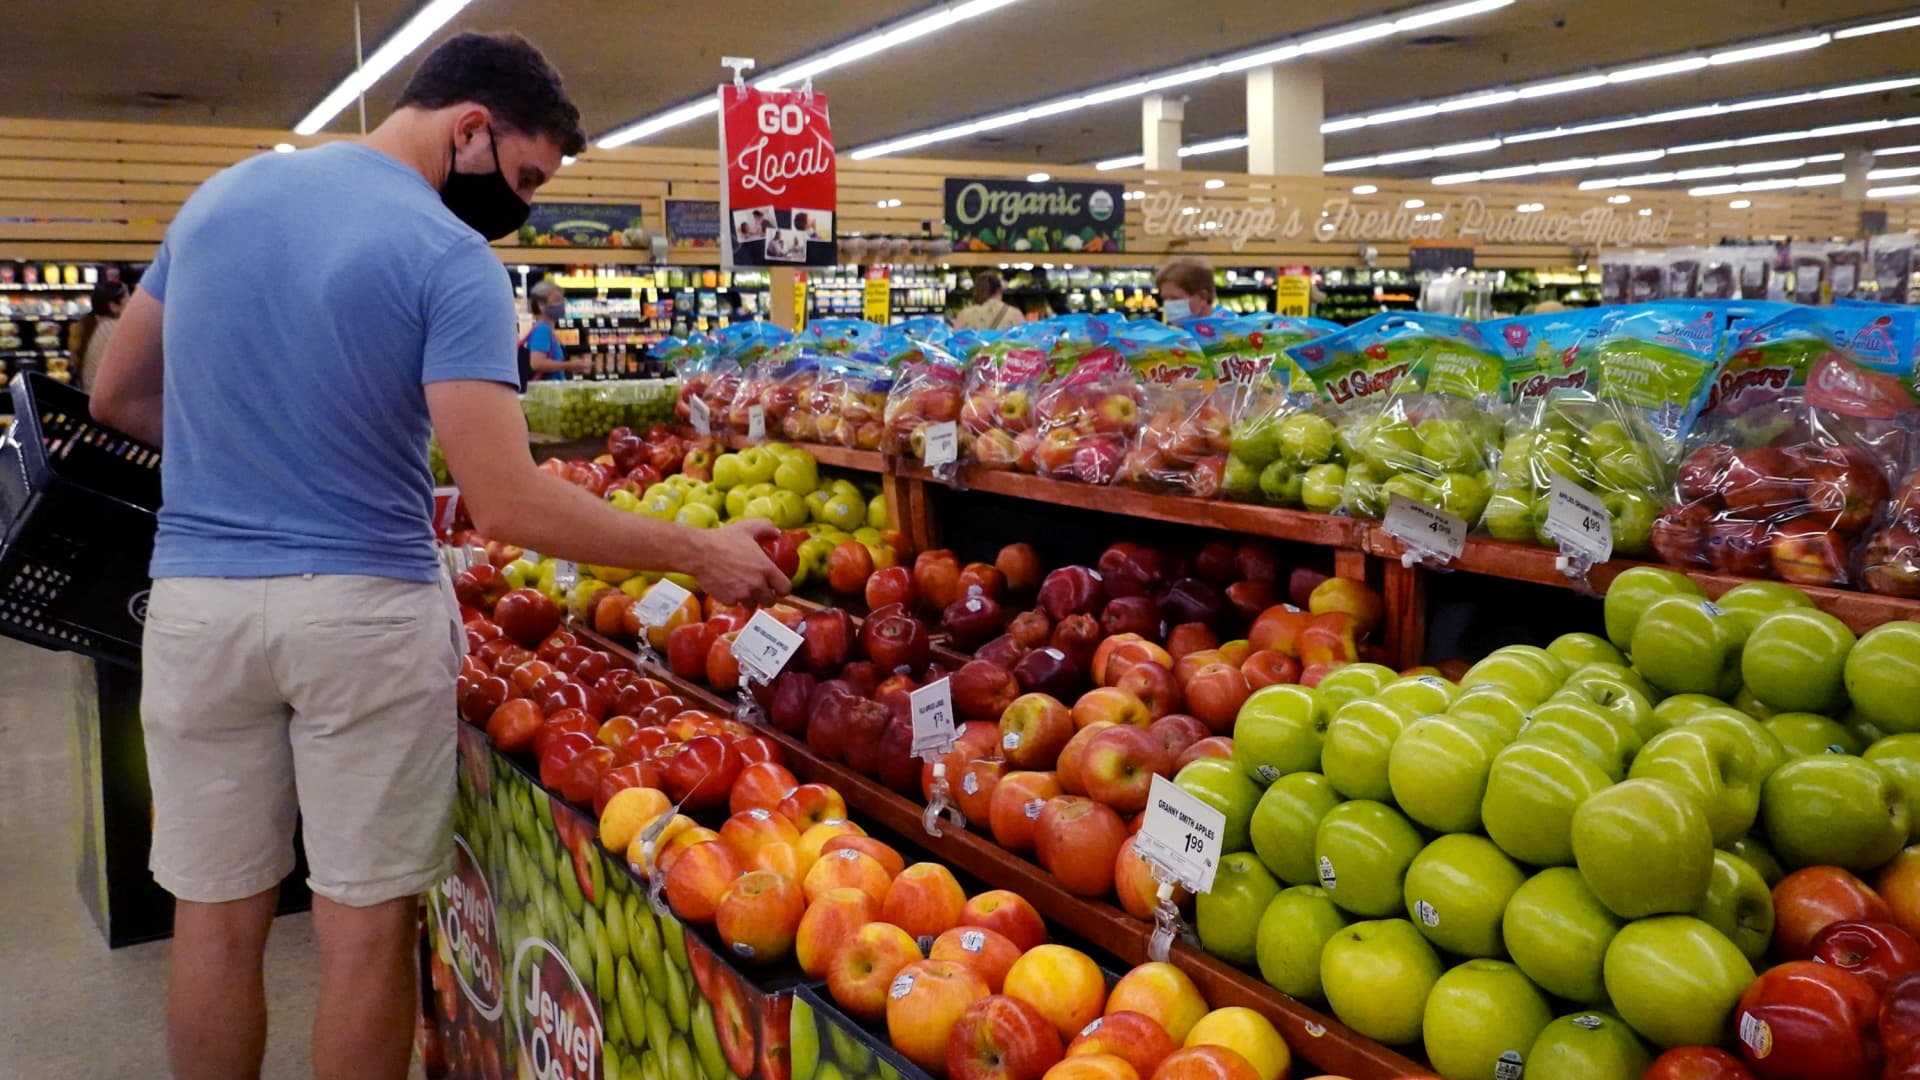 Customers shop for produce at a supermarket on June 10, 2021 in Chicago, Illinois. Inflation rose 5% in the 12-month period ending in May, the biggest jump since August 2008. Food prices rose 2.2 percent for the same period.